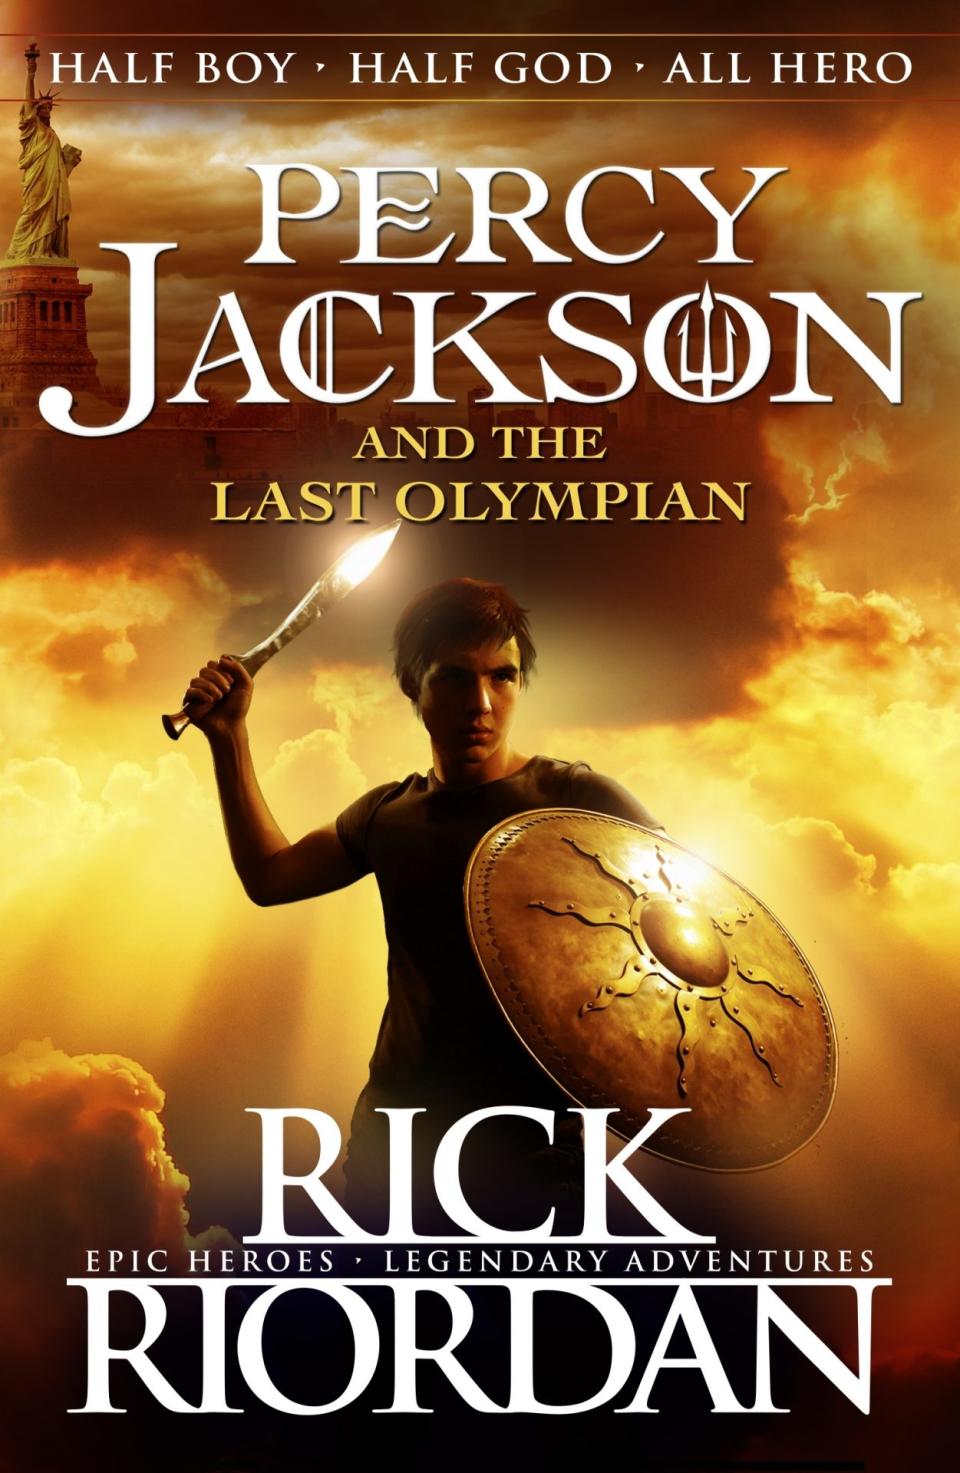 Percy Jackson raises his sword and shield on the cover of The Last Olympian